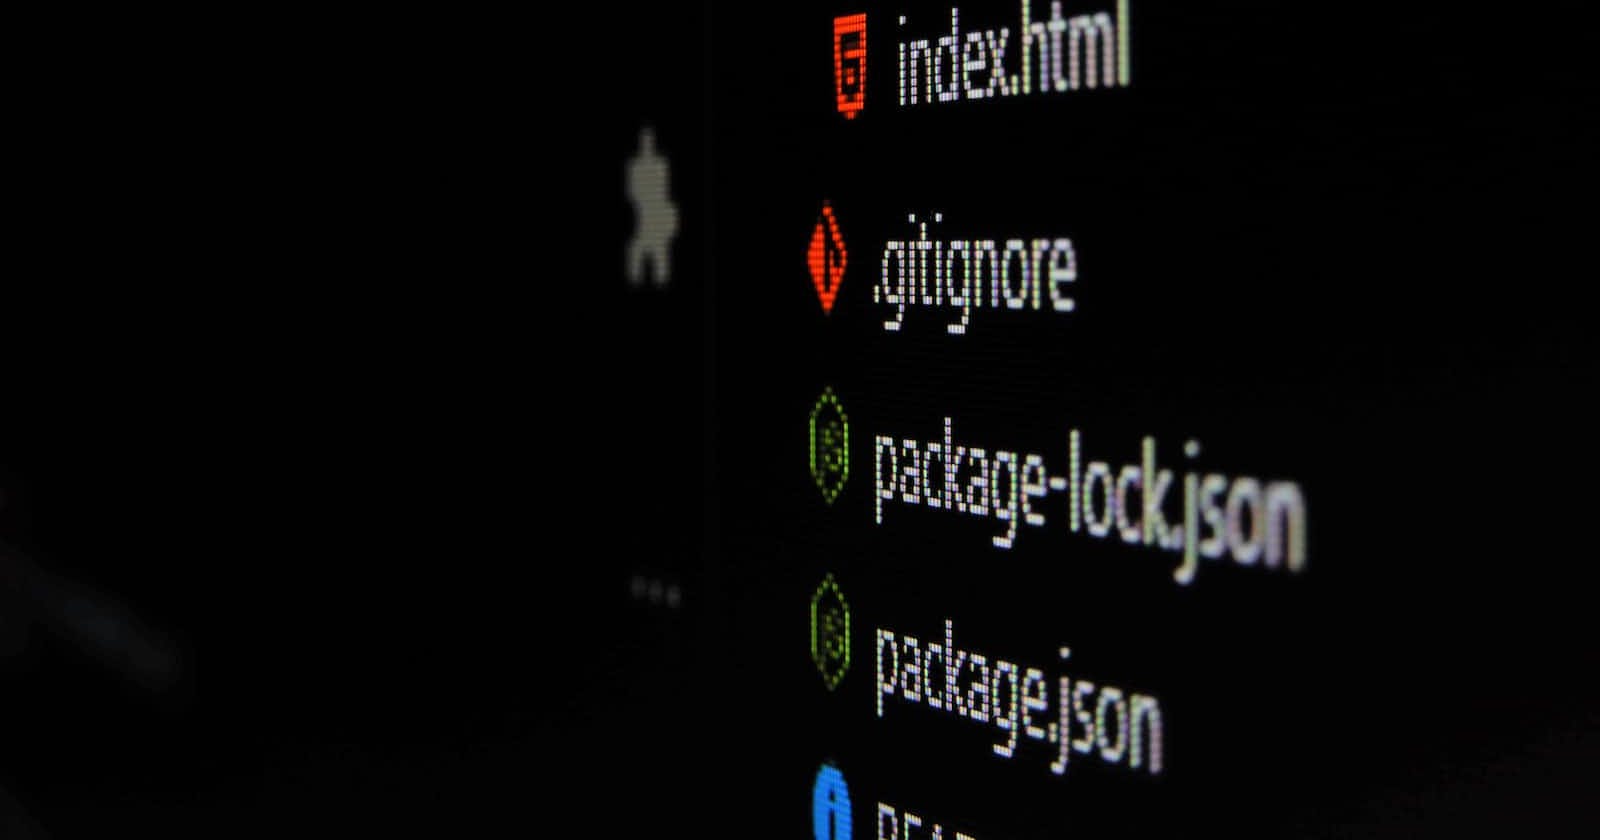 Top 10 Git commands every developer should know